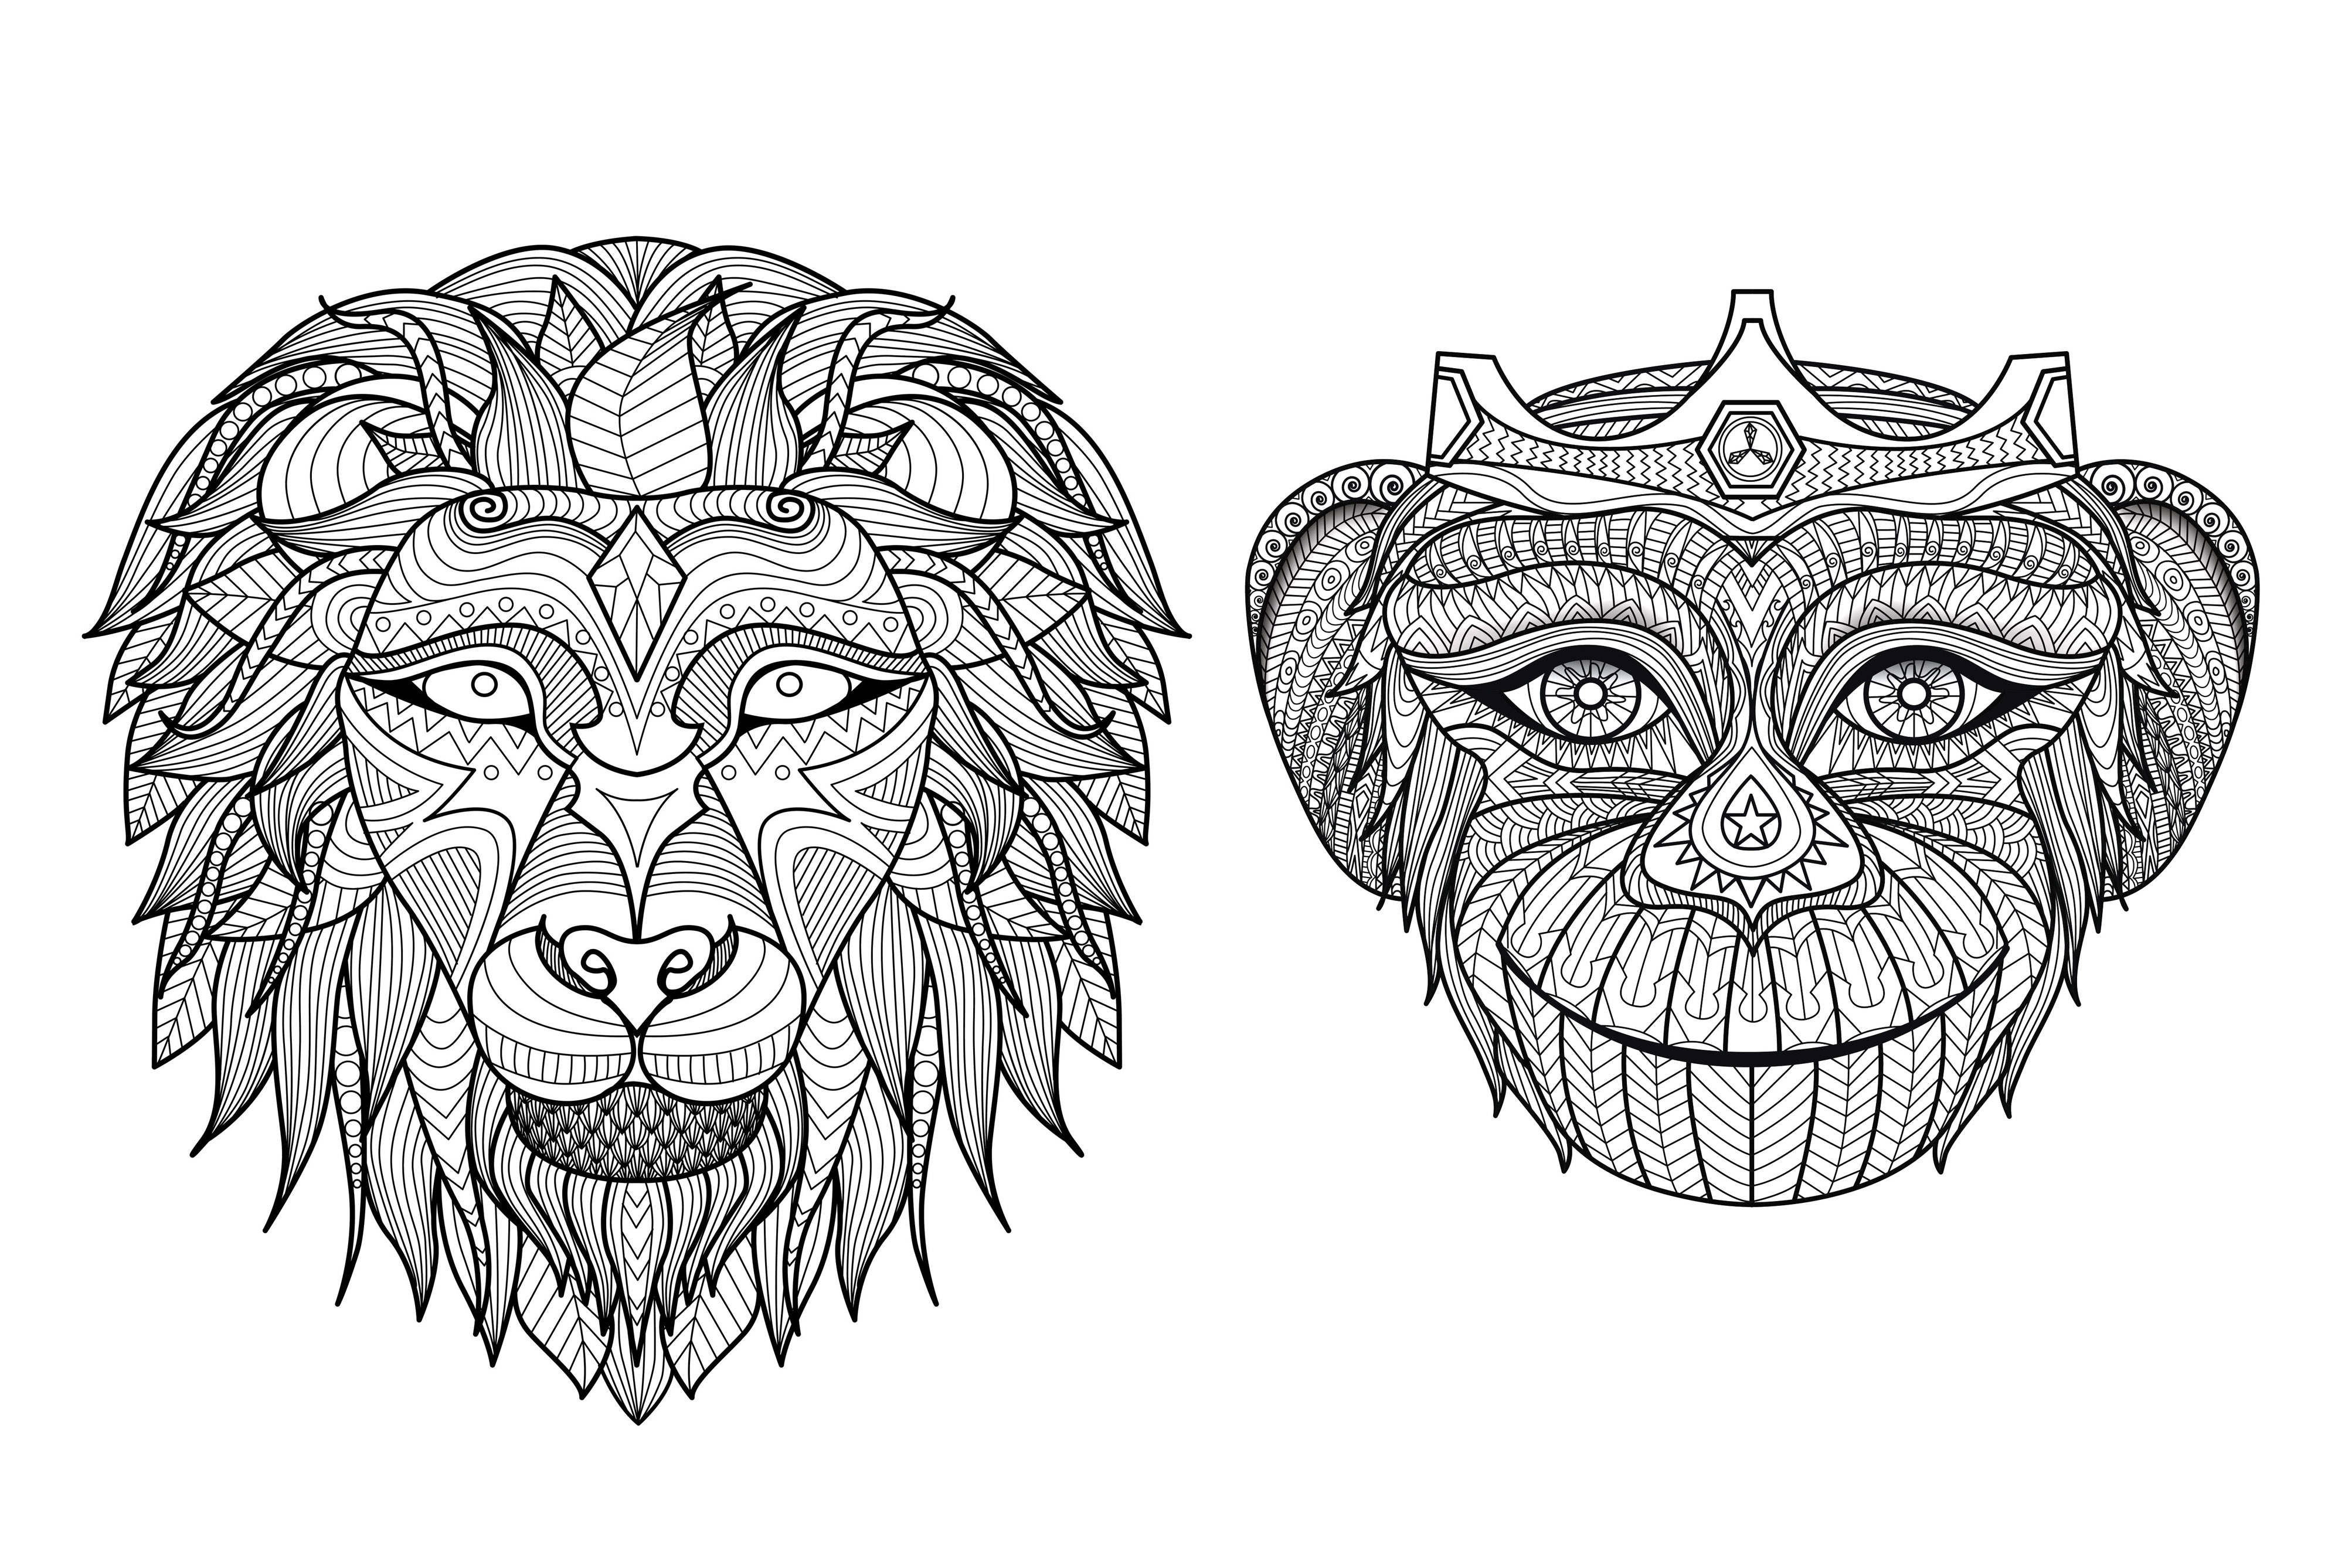 Coloring page of the head of two animals from Africa : A Lion and a Monkey !, Artist : Bimdeedee